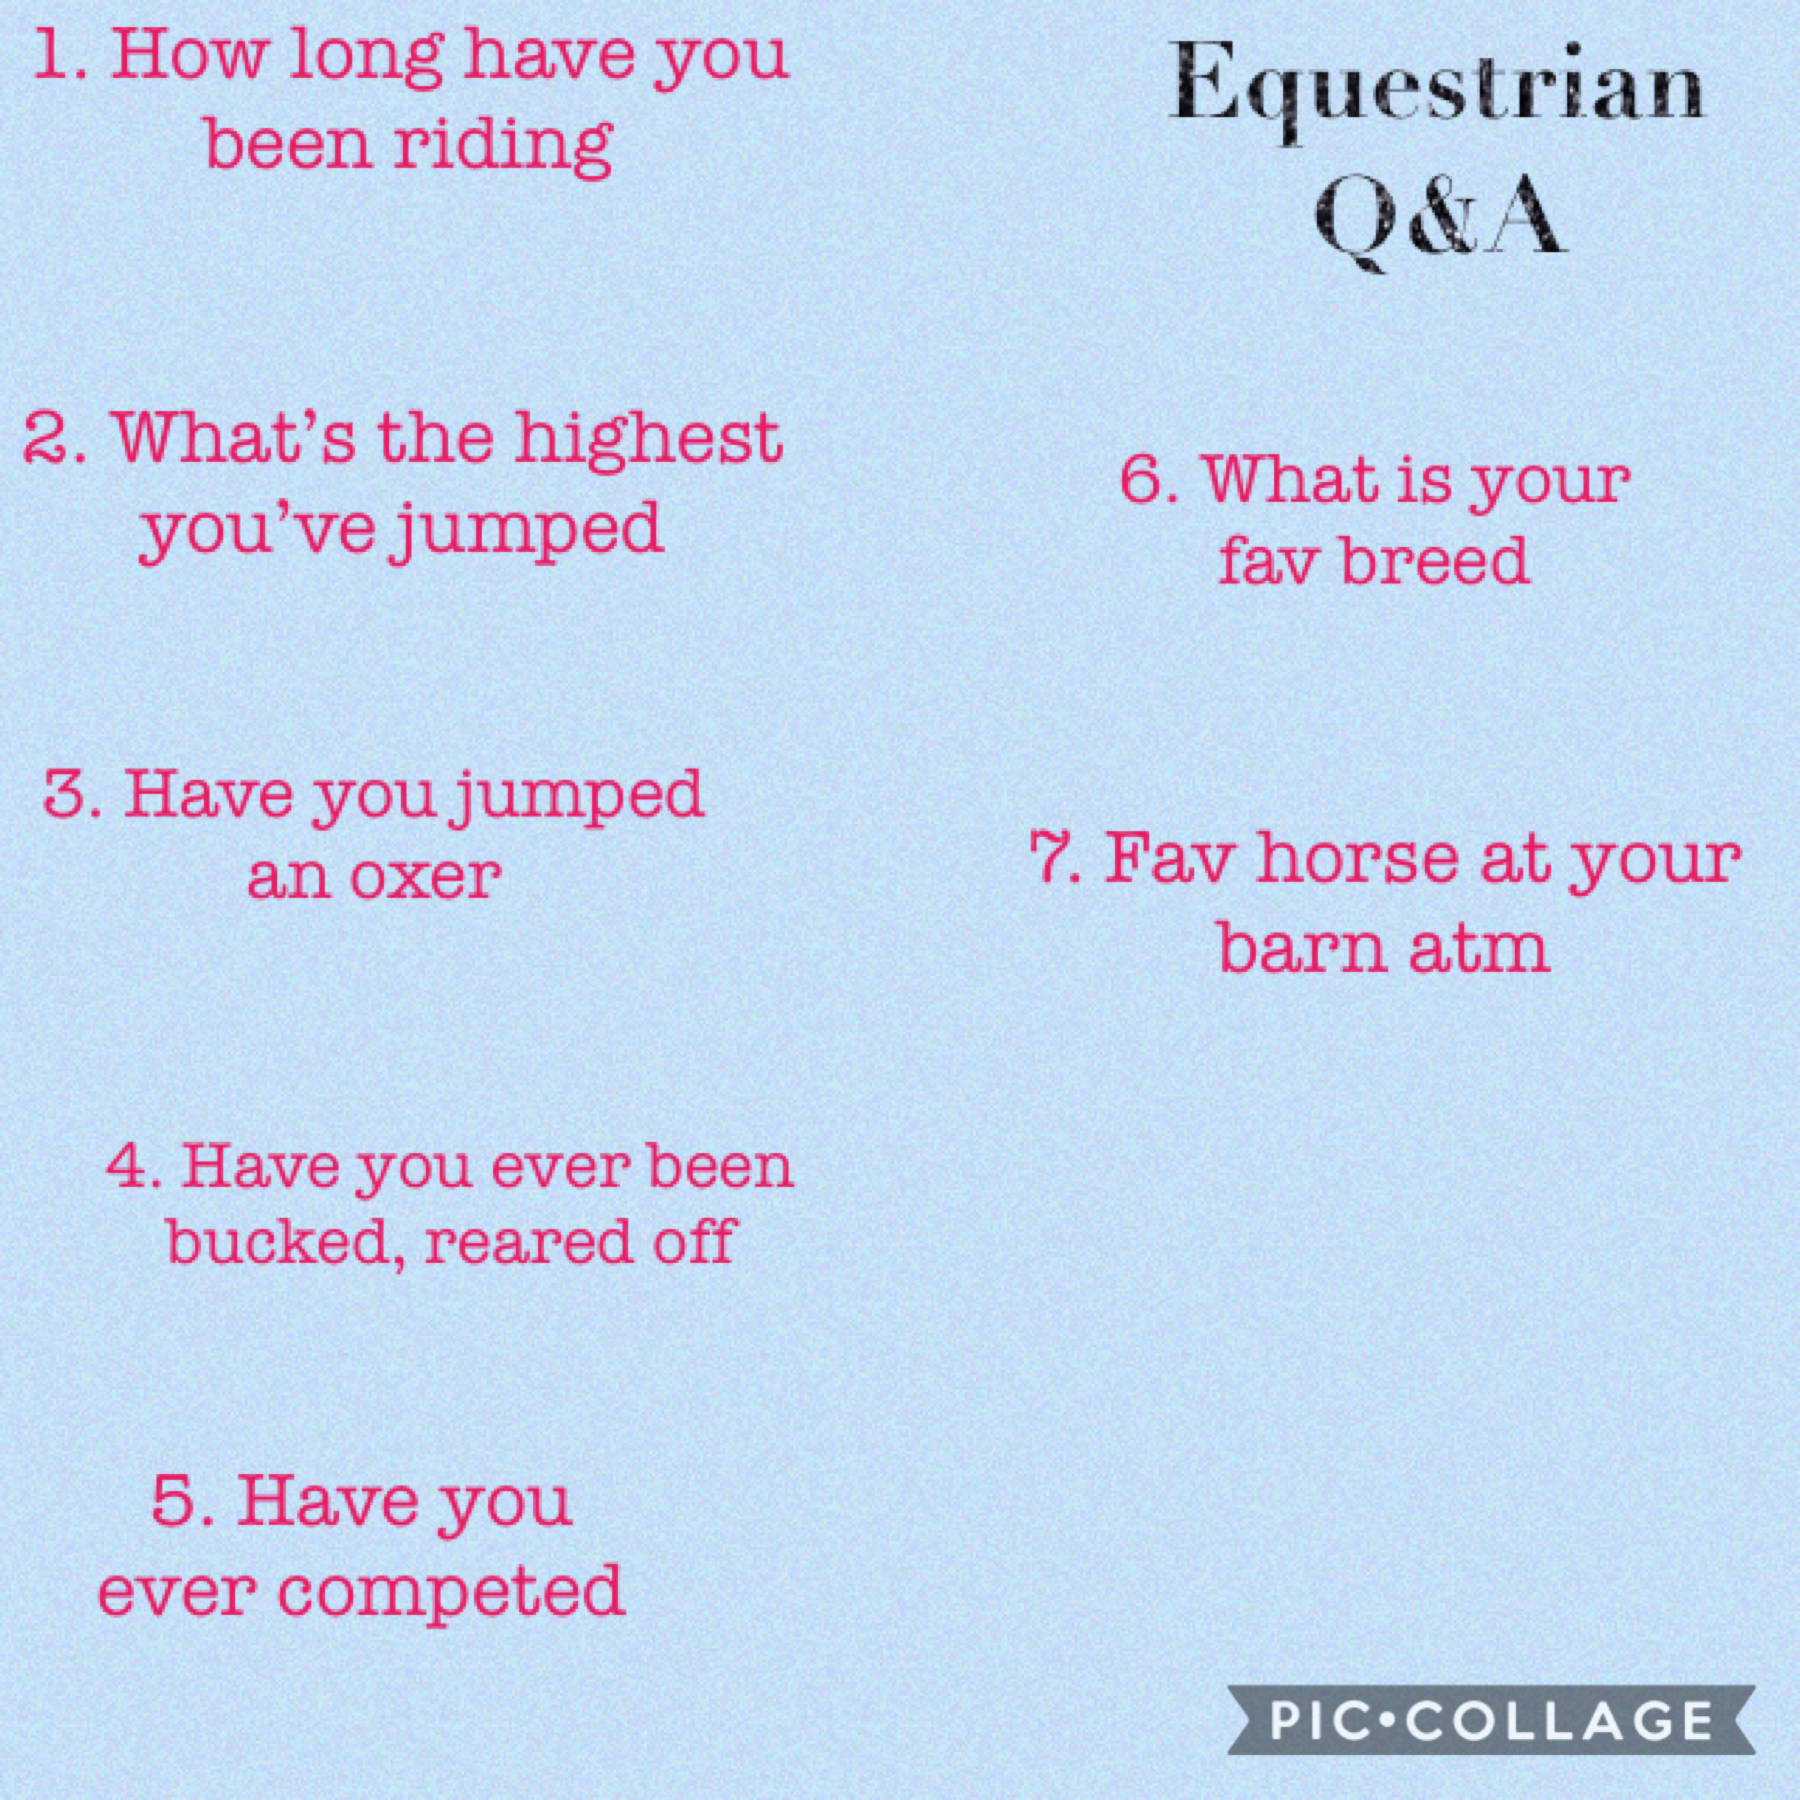 Sorry I haven’t posted in a while. Here is a q&a for all the equestrians put there!